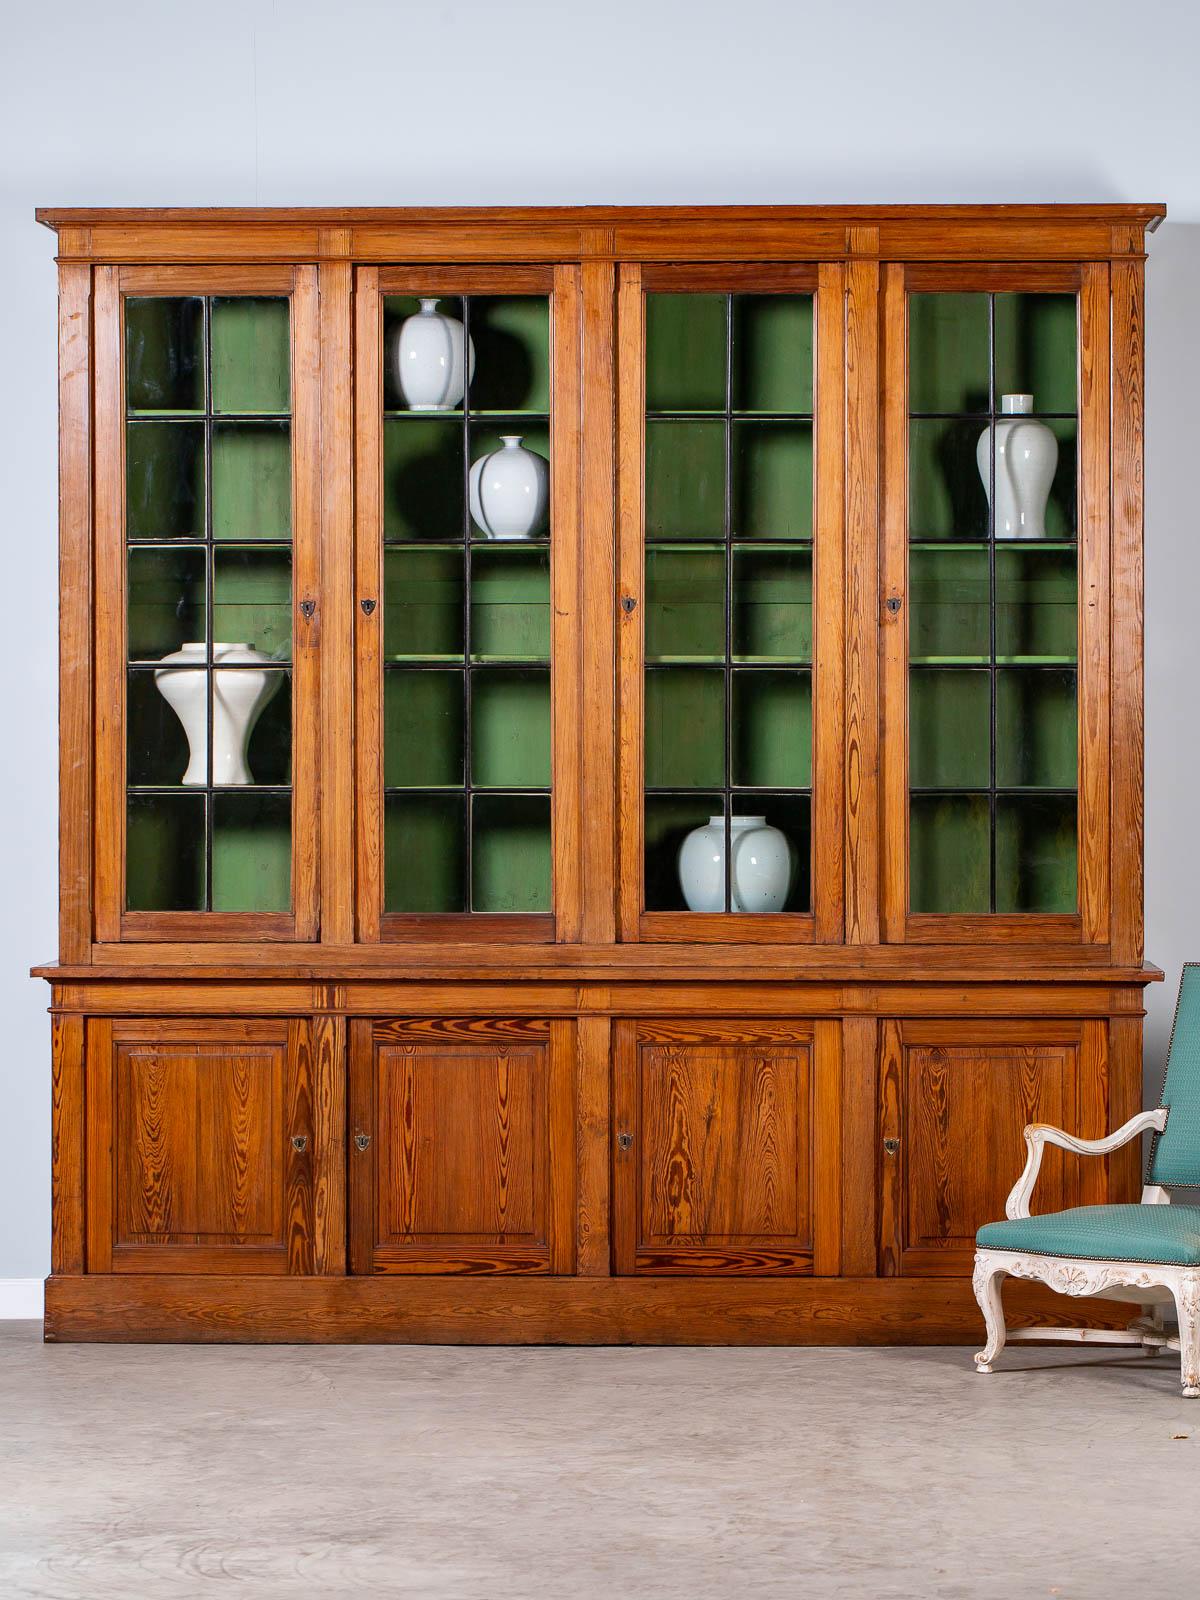 This stunning and enormous antique French pine cabinet bibliotheque is a true rarity. Constructed in two parts, a top that sits on the base, the four upper glass doors retain their original panes of handcut and hand set glass within the original